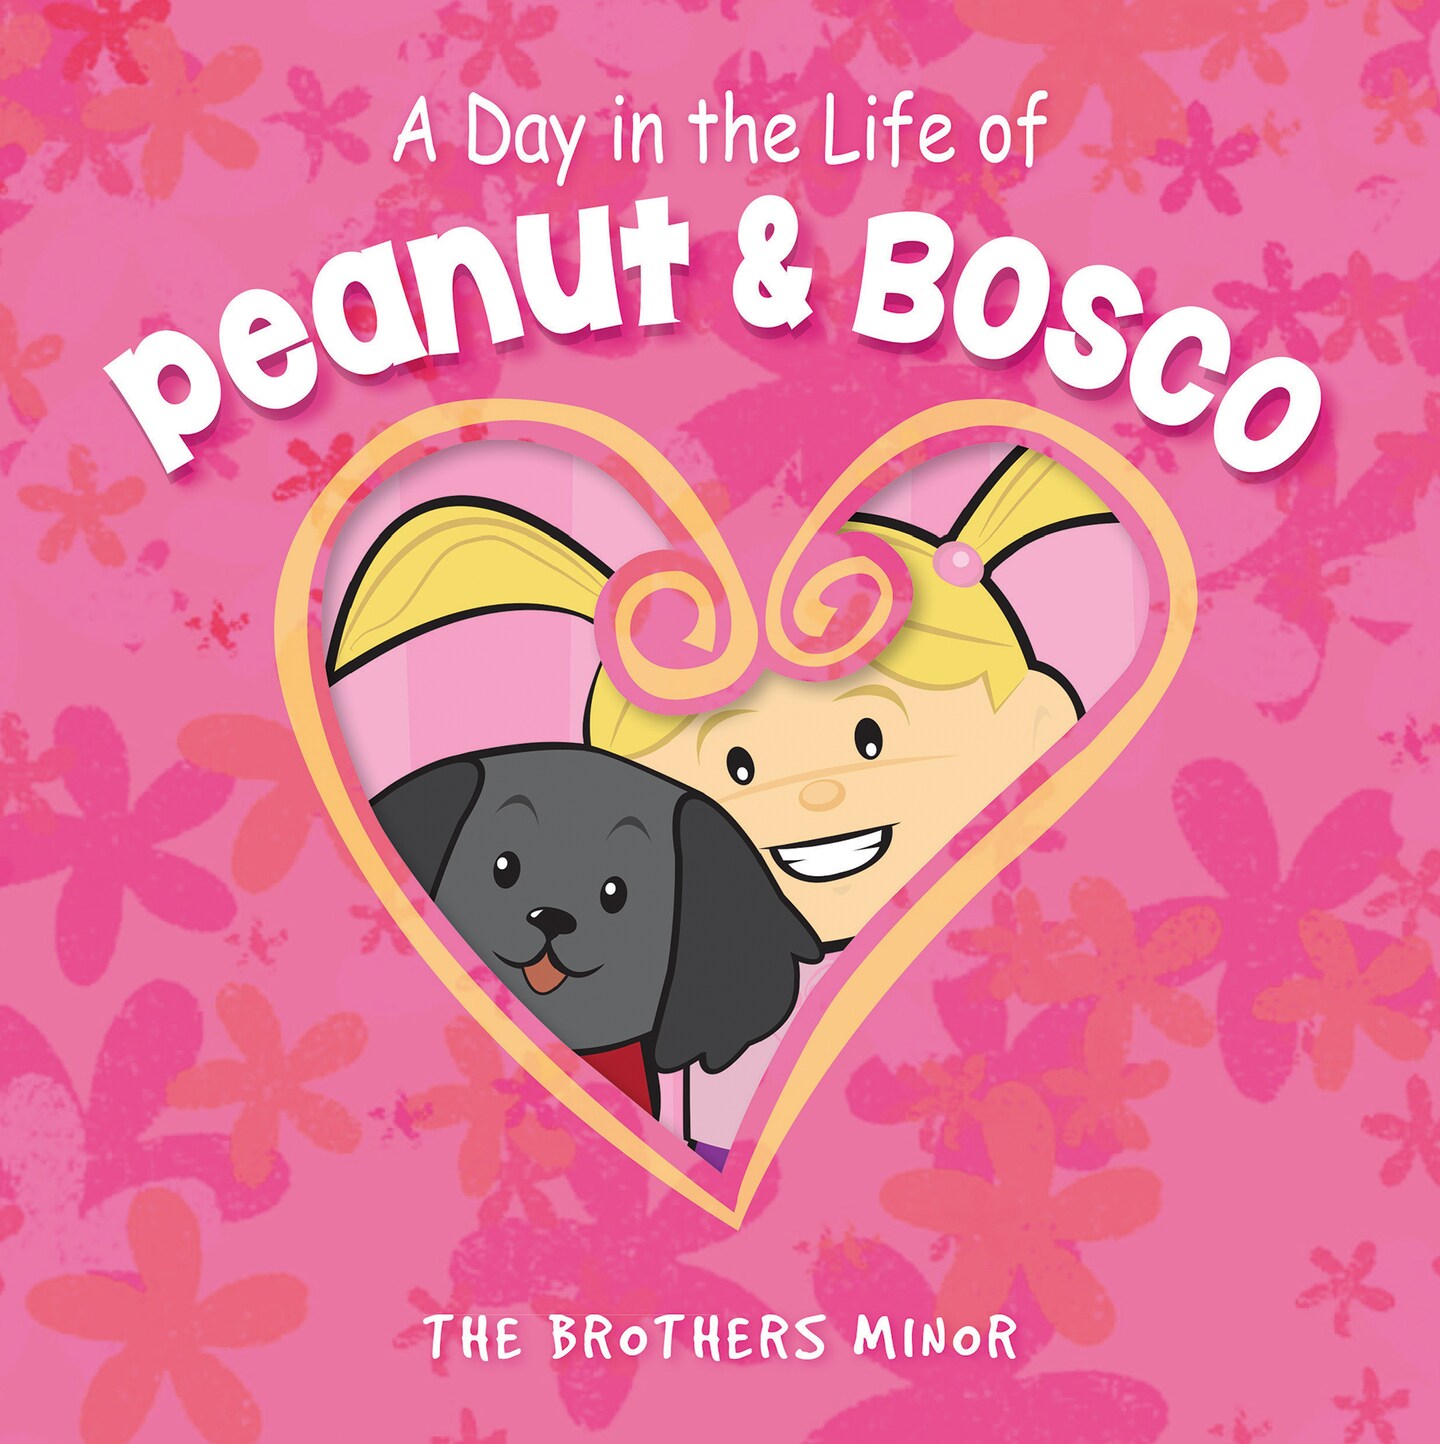 A Day in the Life of Peanut &#x26; Bosco